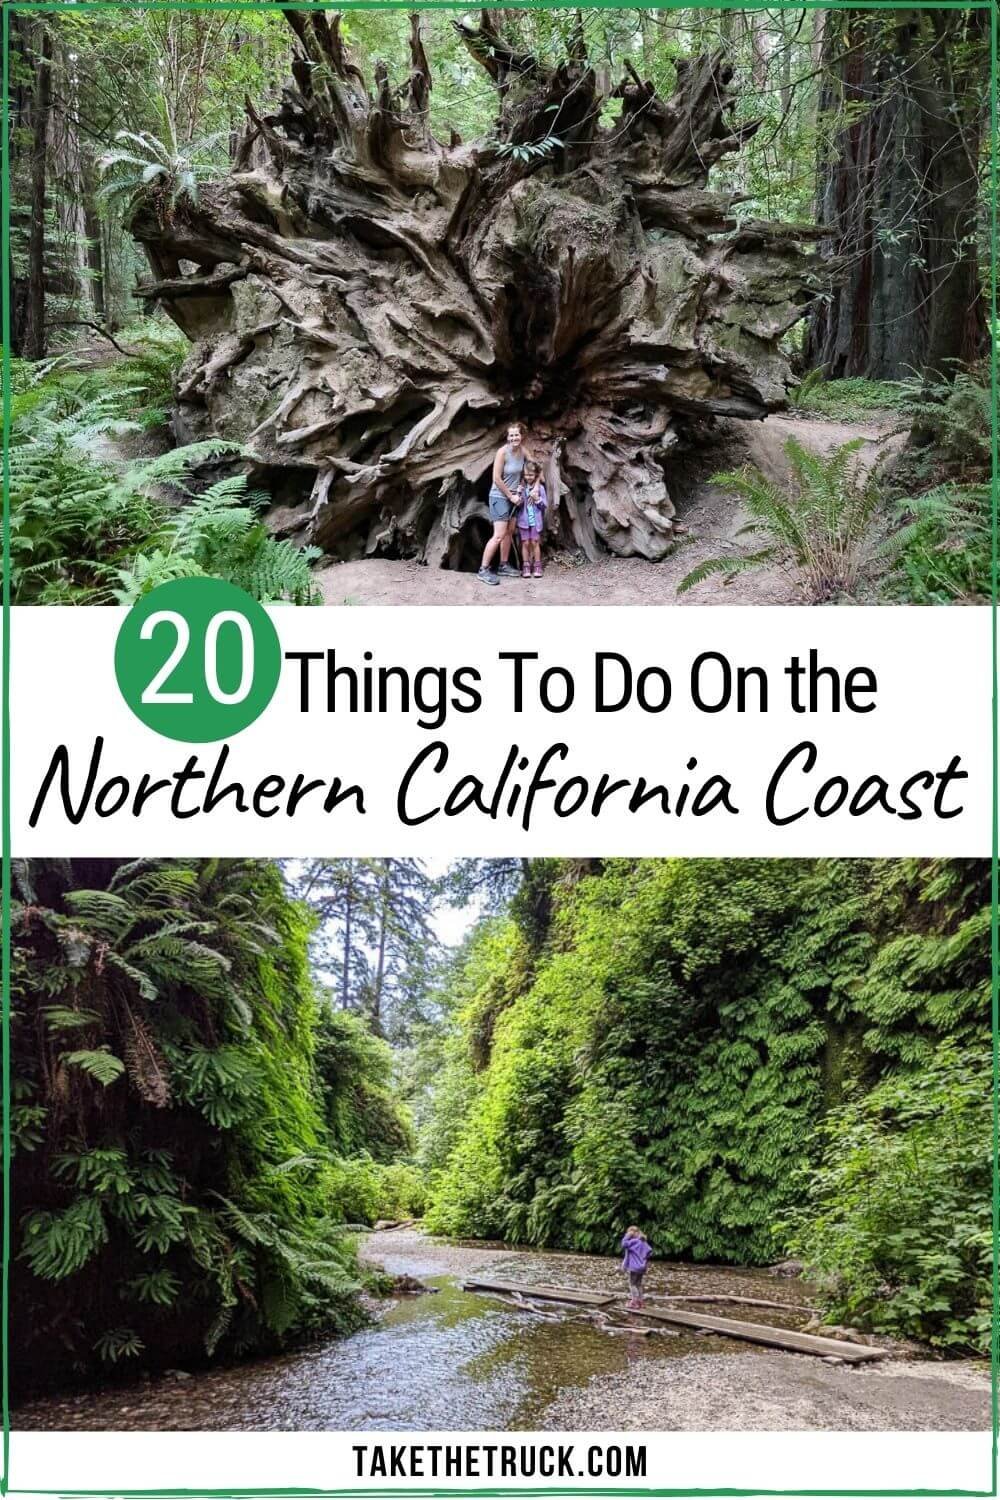 things to do in redwood national park northern california - northern california road trip itinerary - things to do in northern california coast - northern california road trip